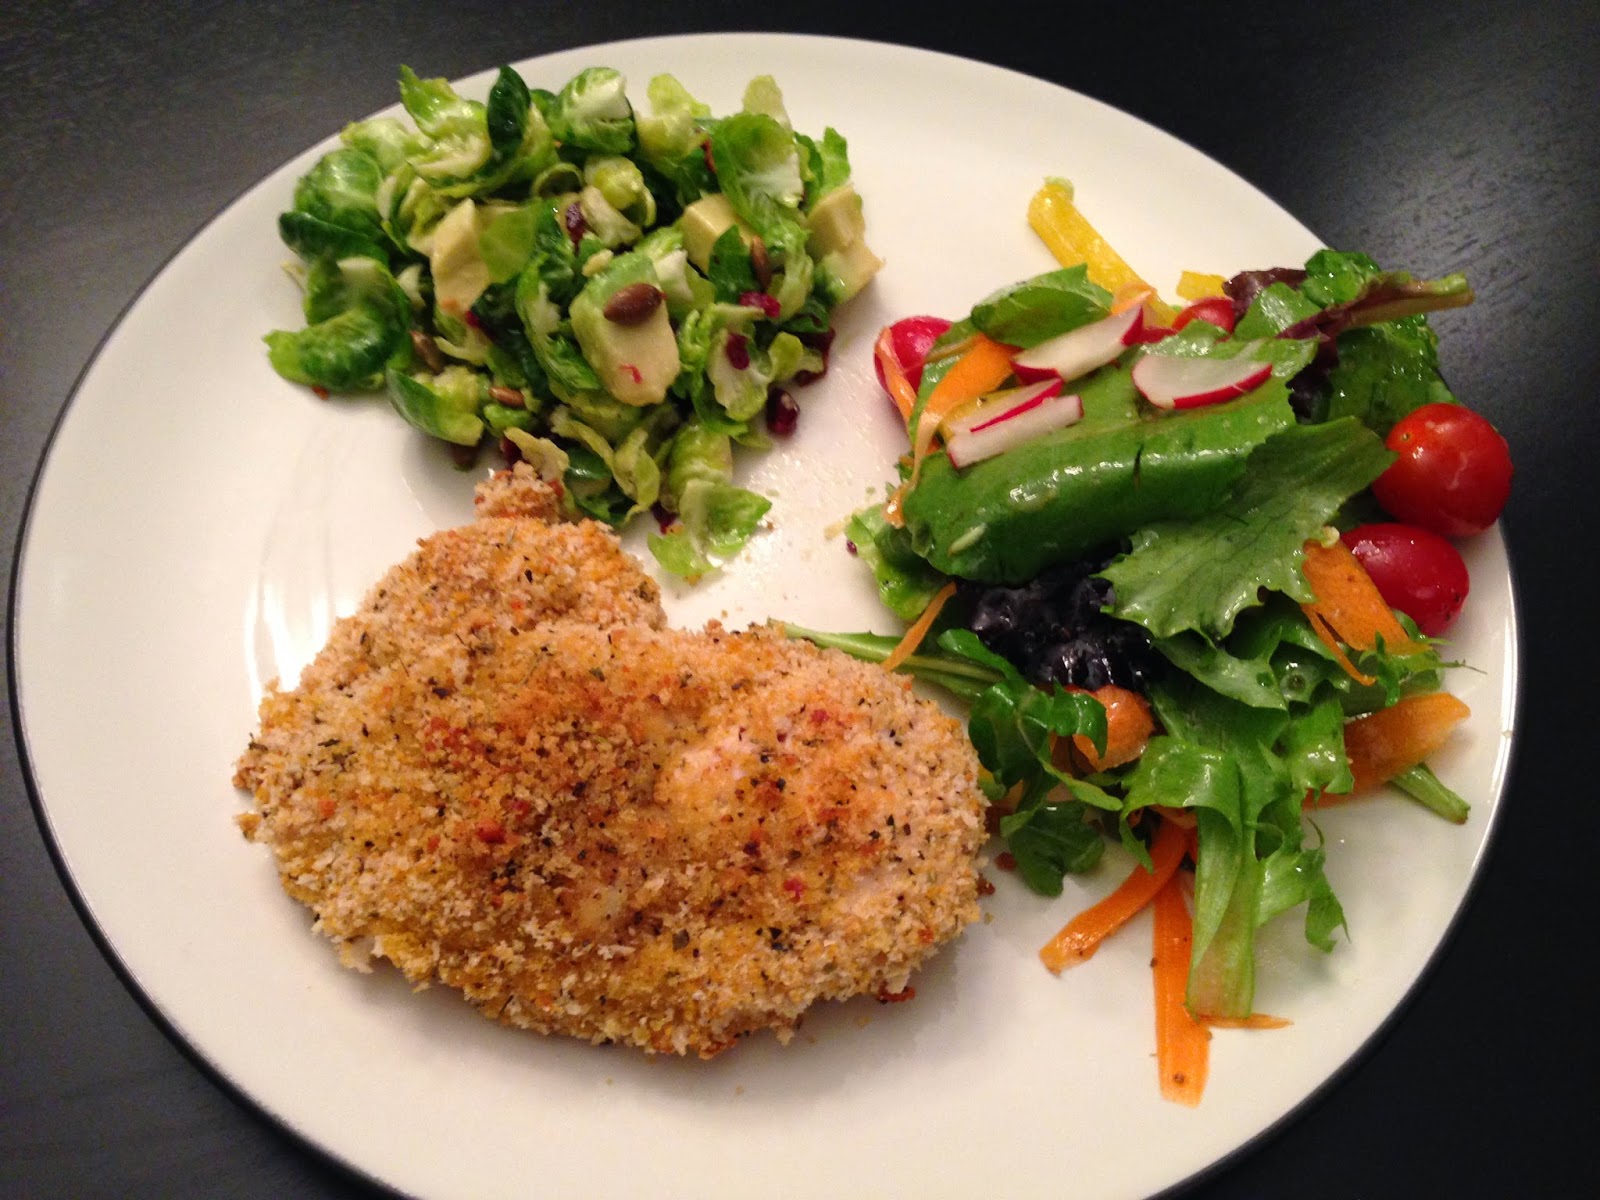 Playing With My Food!: Alex's Crispy & Crunchy Baked Chicken